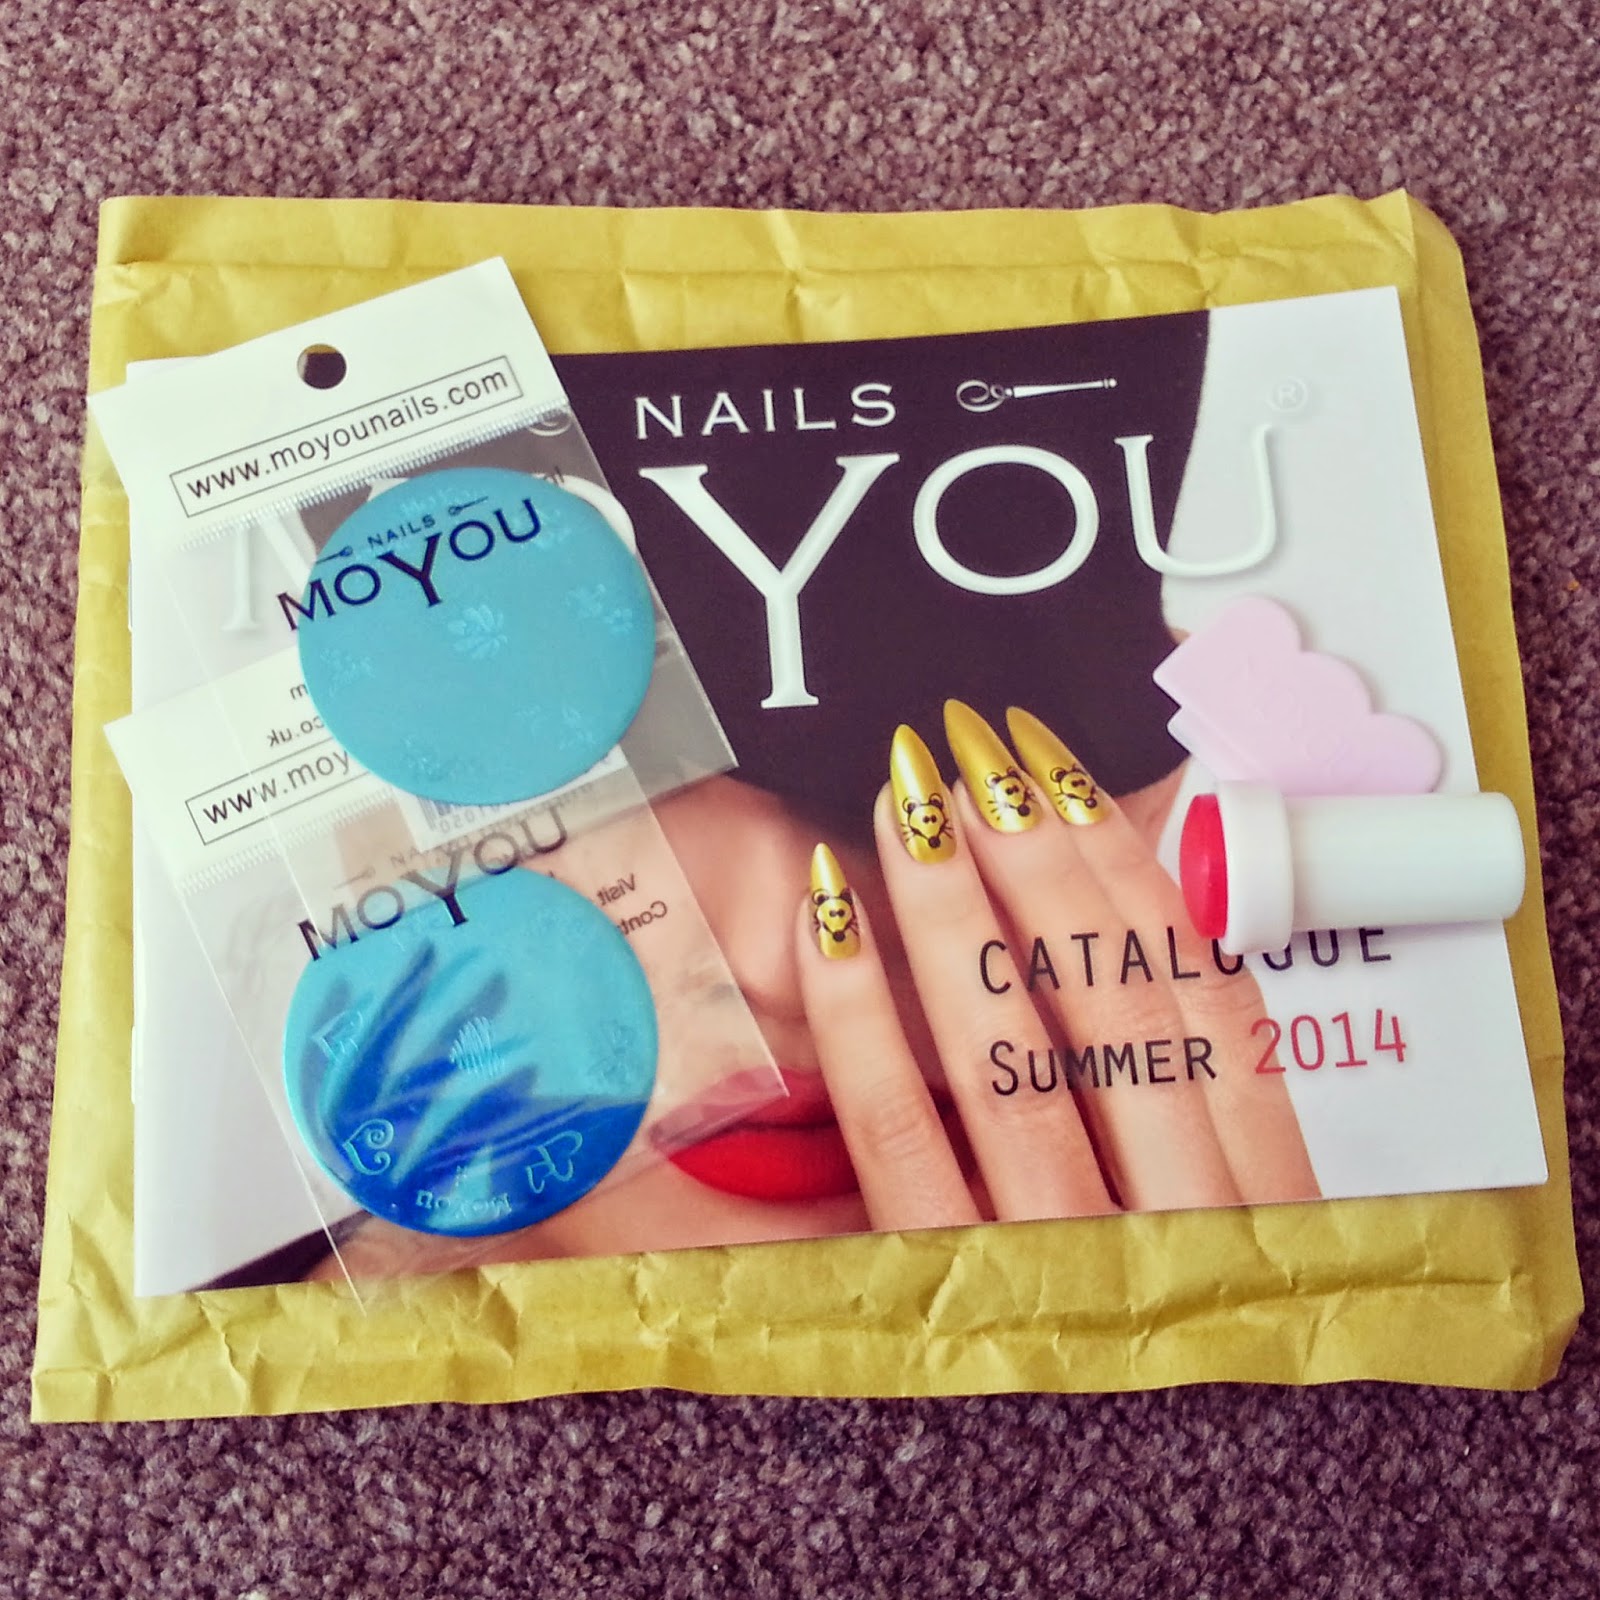 moyou-nails-product-review